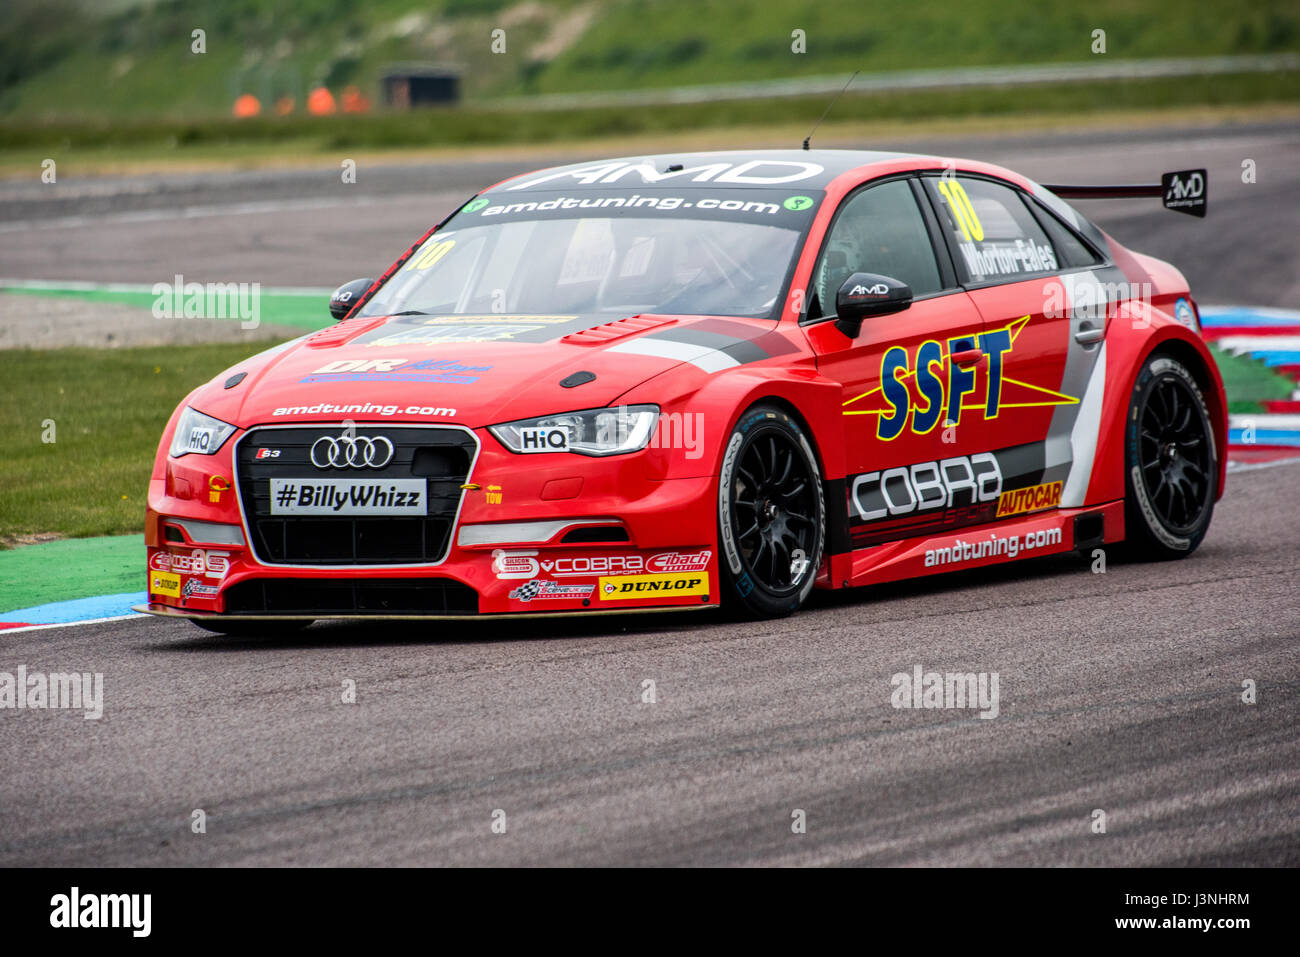 Hampshire, UK. 6th May, 2017. Thruxton Race Circuit and Motorsport Centre, Andover, Hampshire, United Kingdom. 6 May 2016. Ant Whorton-Eales of team AmDtuning.com with Cobra Exhausts Qualifying at Dunlop MSA British Touring Car Championship in his Audi S3. All cars race today with the #BillyWhizz number plates and livery in support of Billy Monger who suffered life changing injuries at Donington Park a few weeks ago during an F4 (Formula 4) British Championship Race. © Will Bailey / Alamy Live News Stock Photo